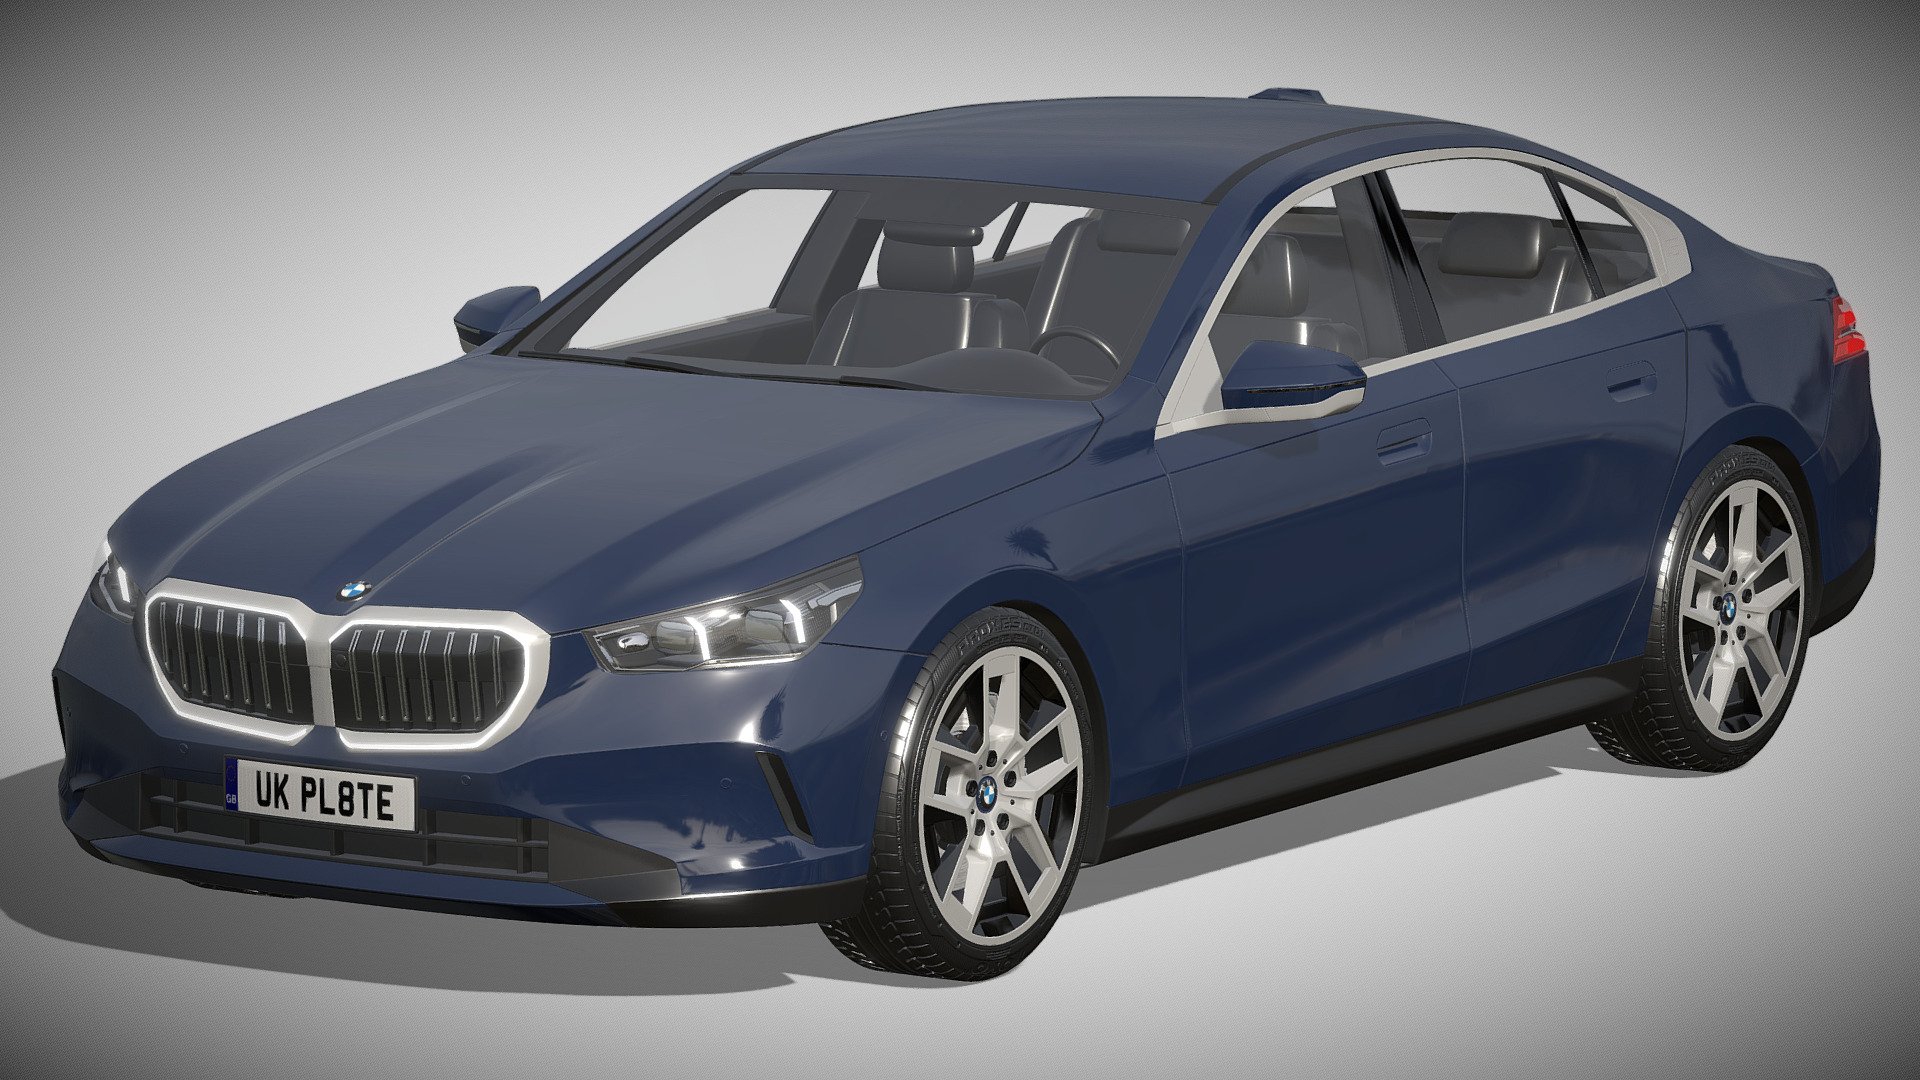 BMW 5-series G60 2024

https://www.bmw.de/de/neufahrzeuge/5er/limousine/bmw-5er-limousine-ueberblick.html

Clean geometry Light weight model, yet completely detailed for HI-Res renders. Use for movies, Advertisements or games

Corona render and materials

All textures include in *.rar files

Lighting setup is not included in the file! - BMW 5-series G60 2024 - Buy Royalty Free 3D model by zifir3d 3d model